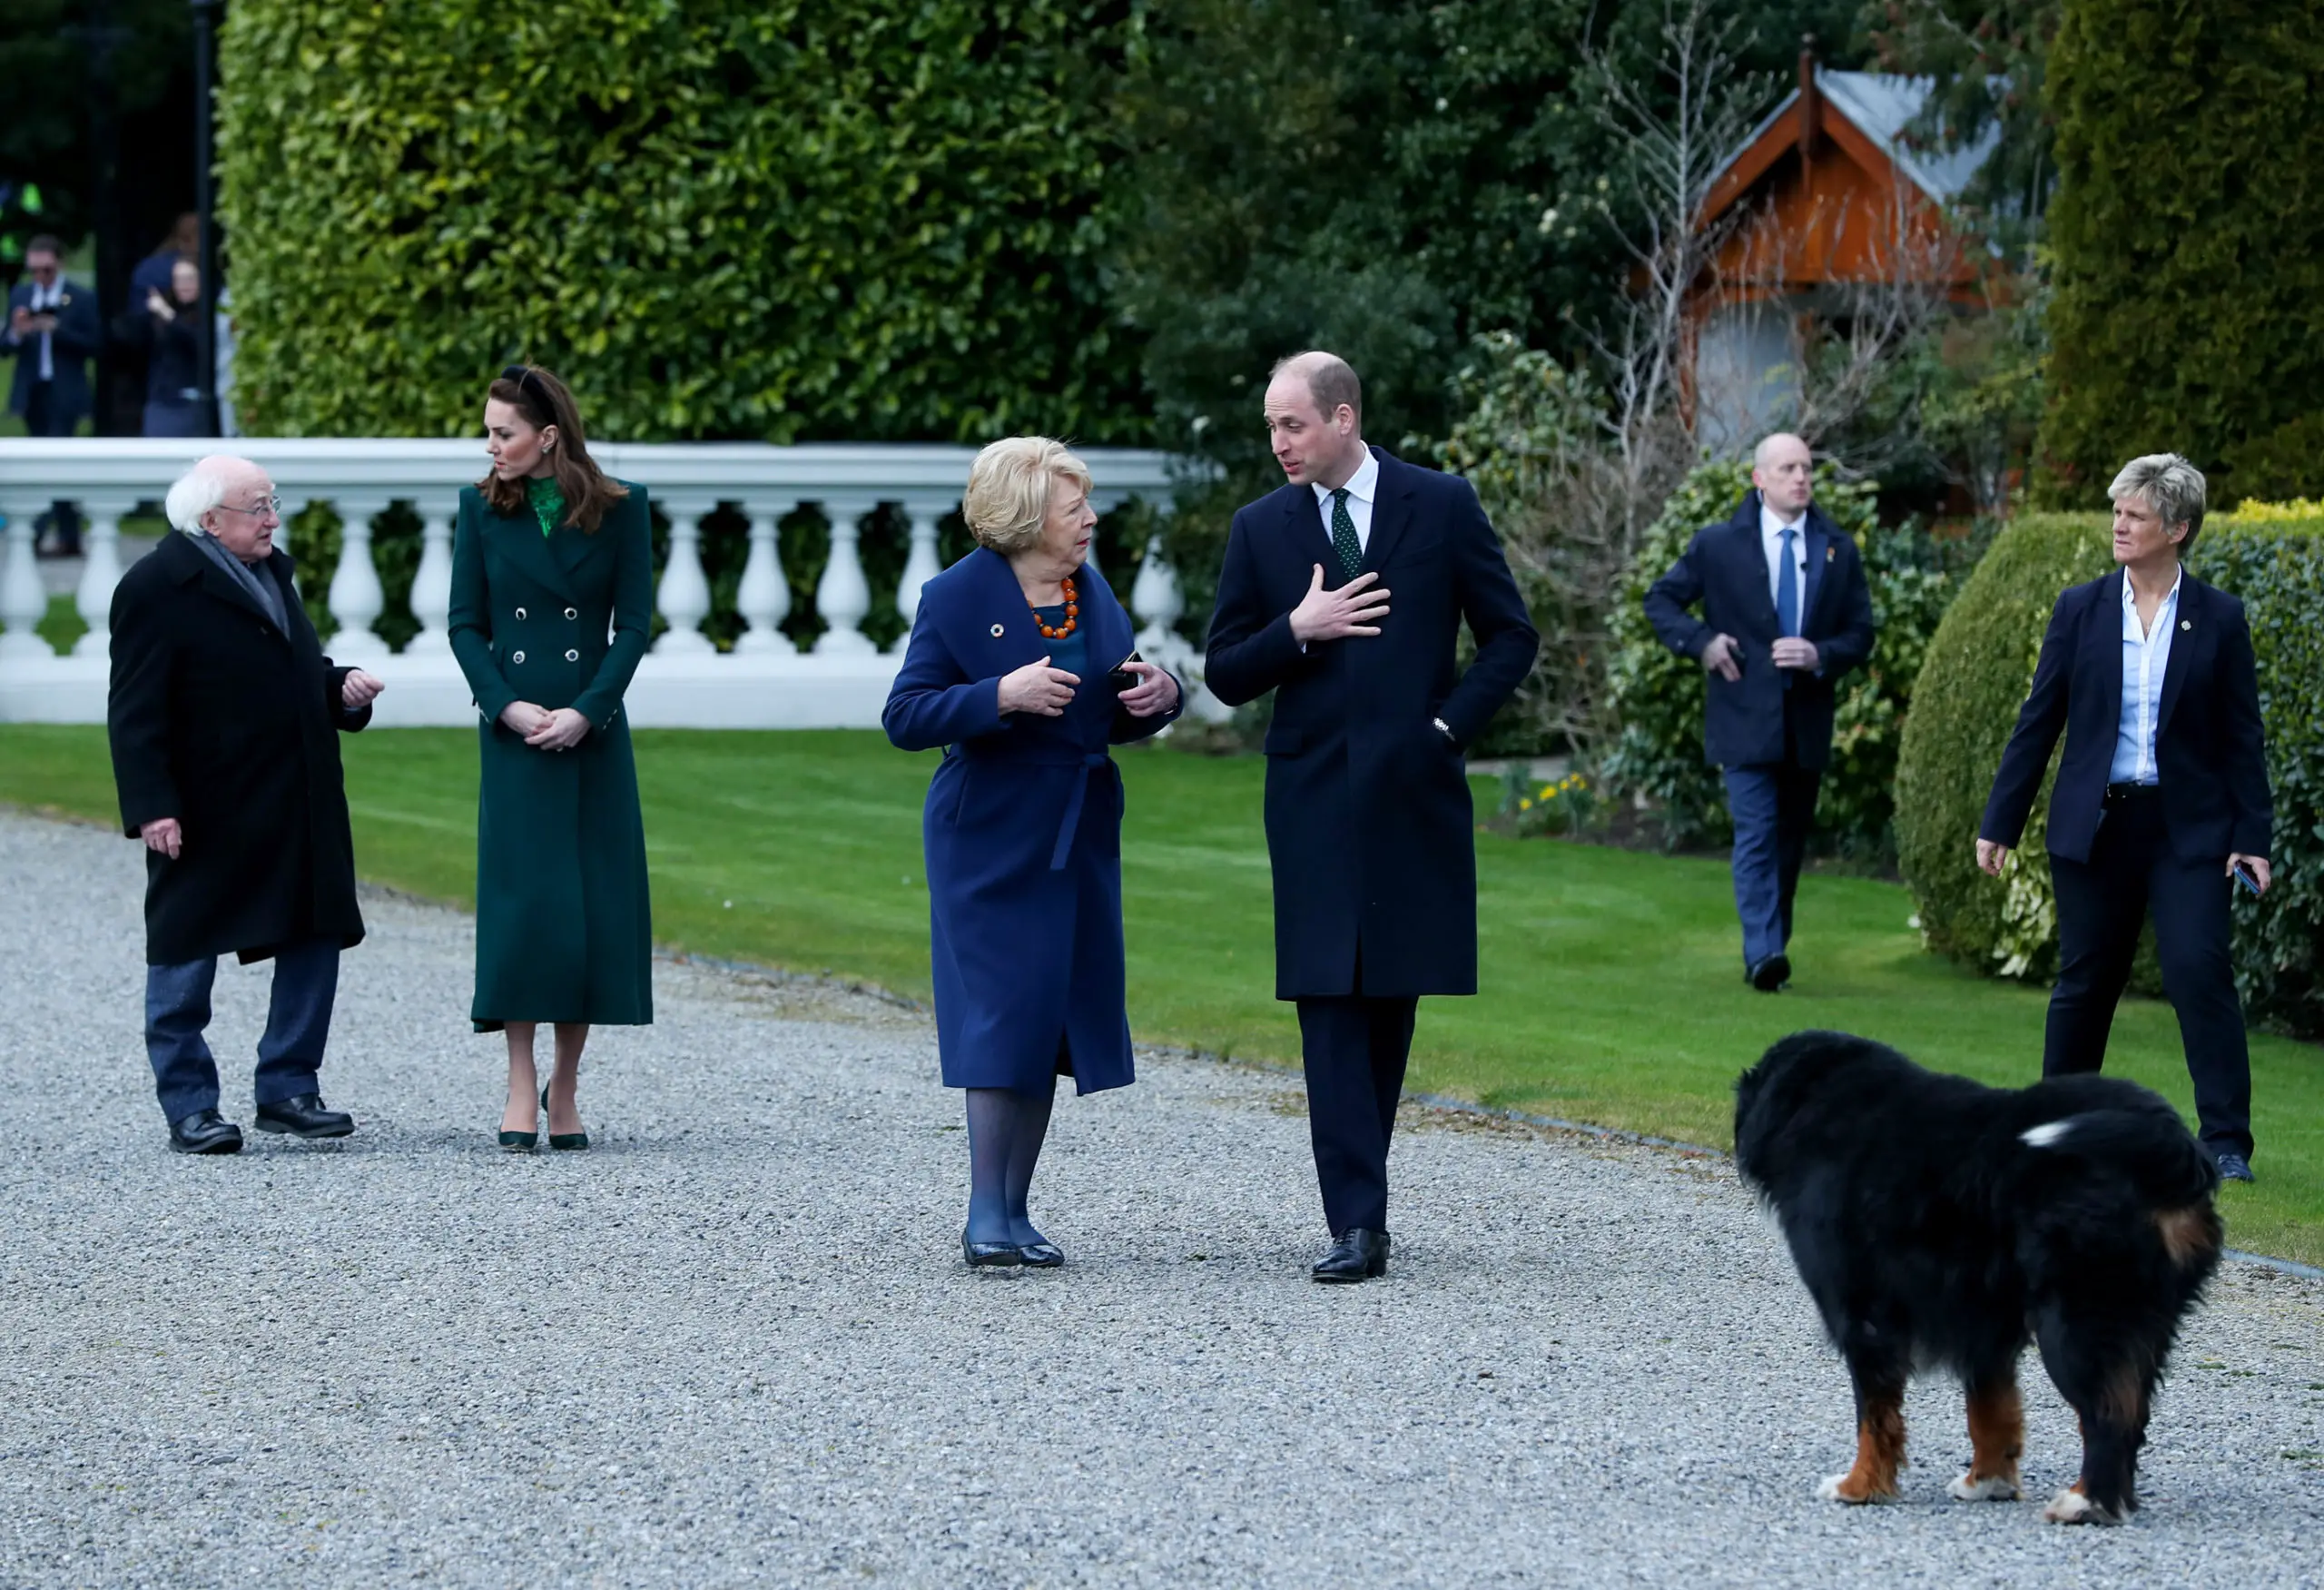 The Duke and Duchess of Cambridge met with the Irish President Michael D Higgins and First Lady Sabina Higgins